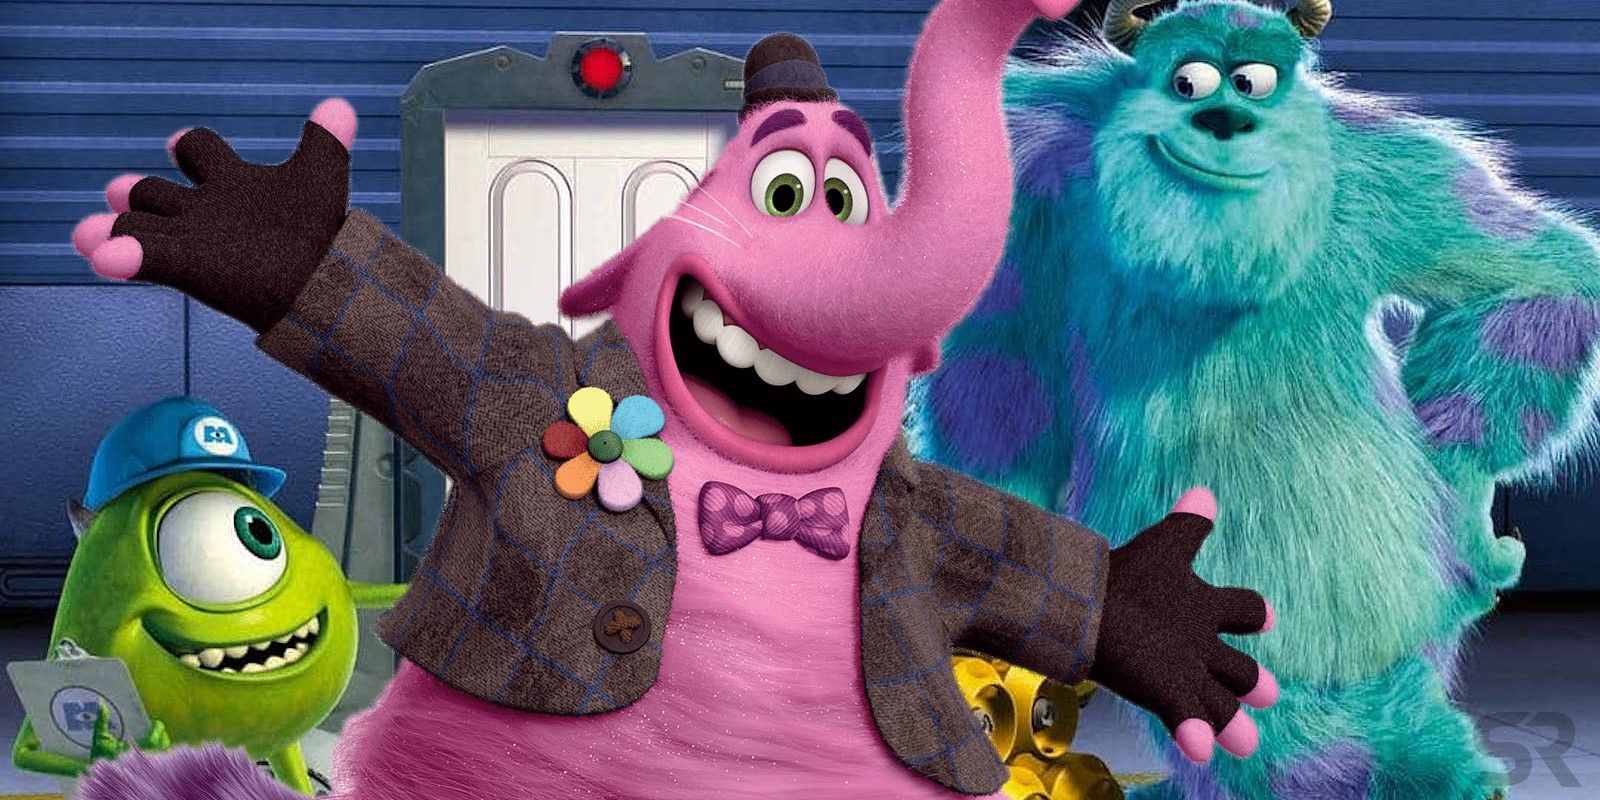 Pixar Theory: Inside Out’s Bing Bong Is From Monsters Inc.